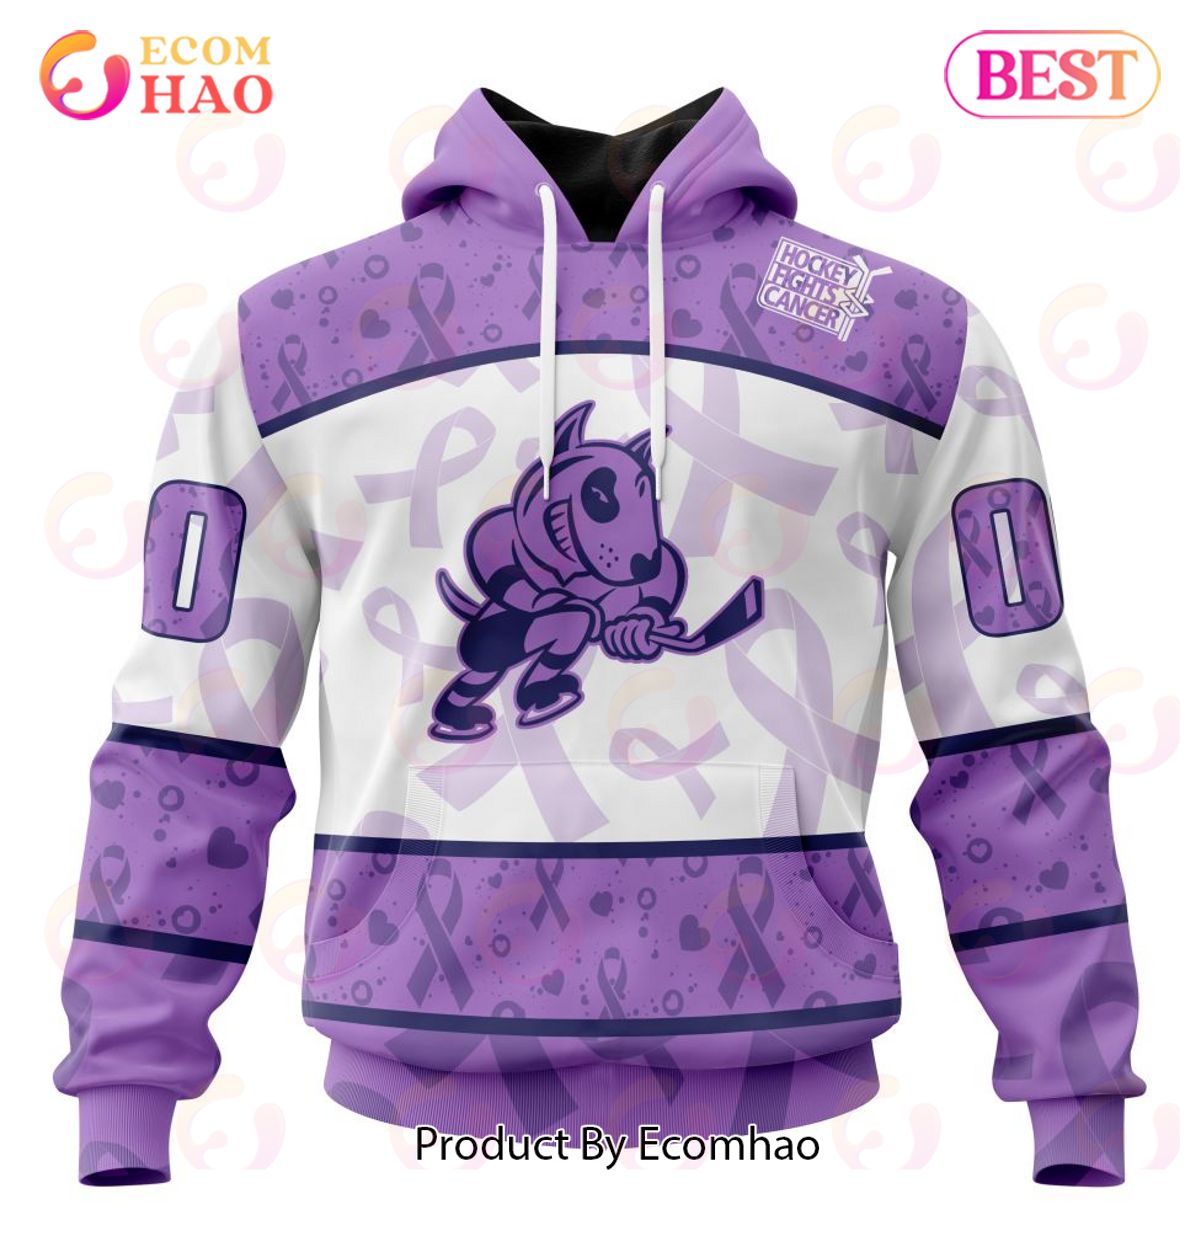 OHL Niagara IceDogs Special Lavender Fight Cancer 3D Hoodie